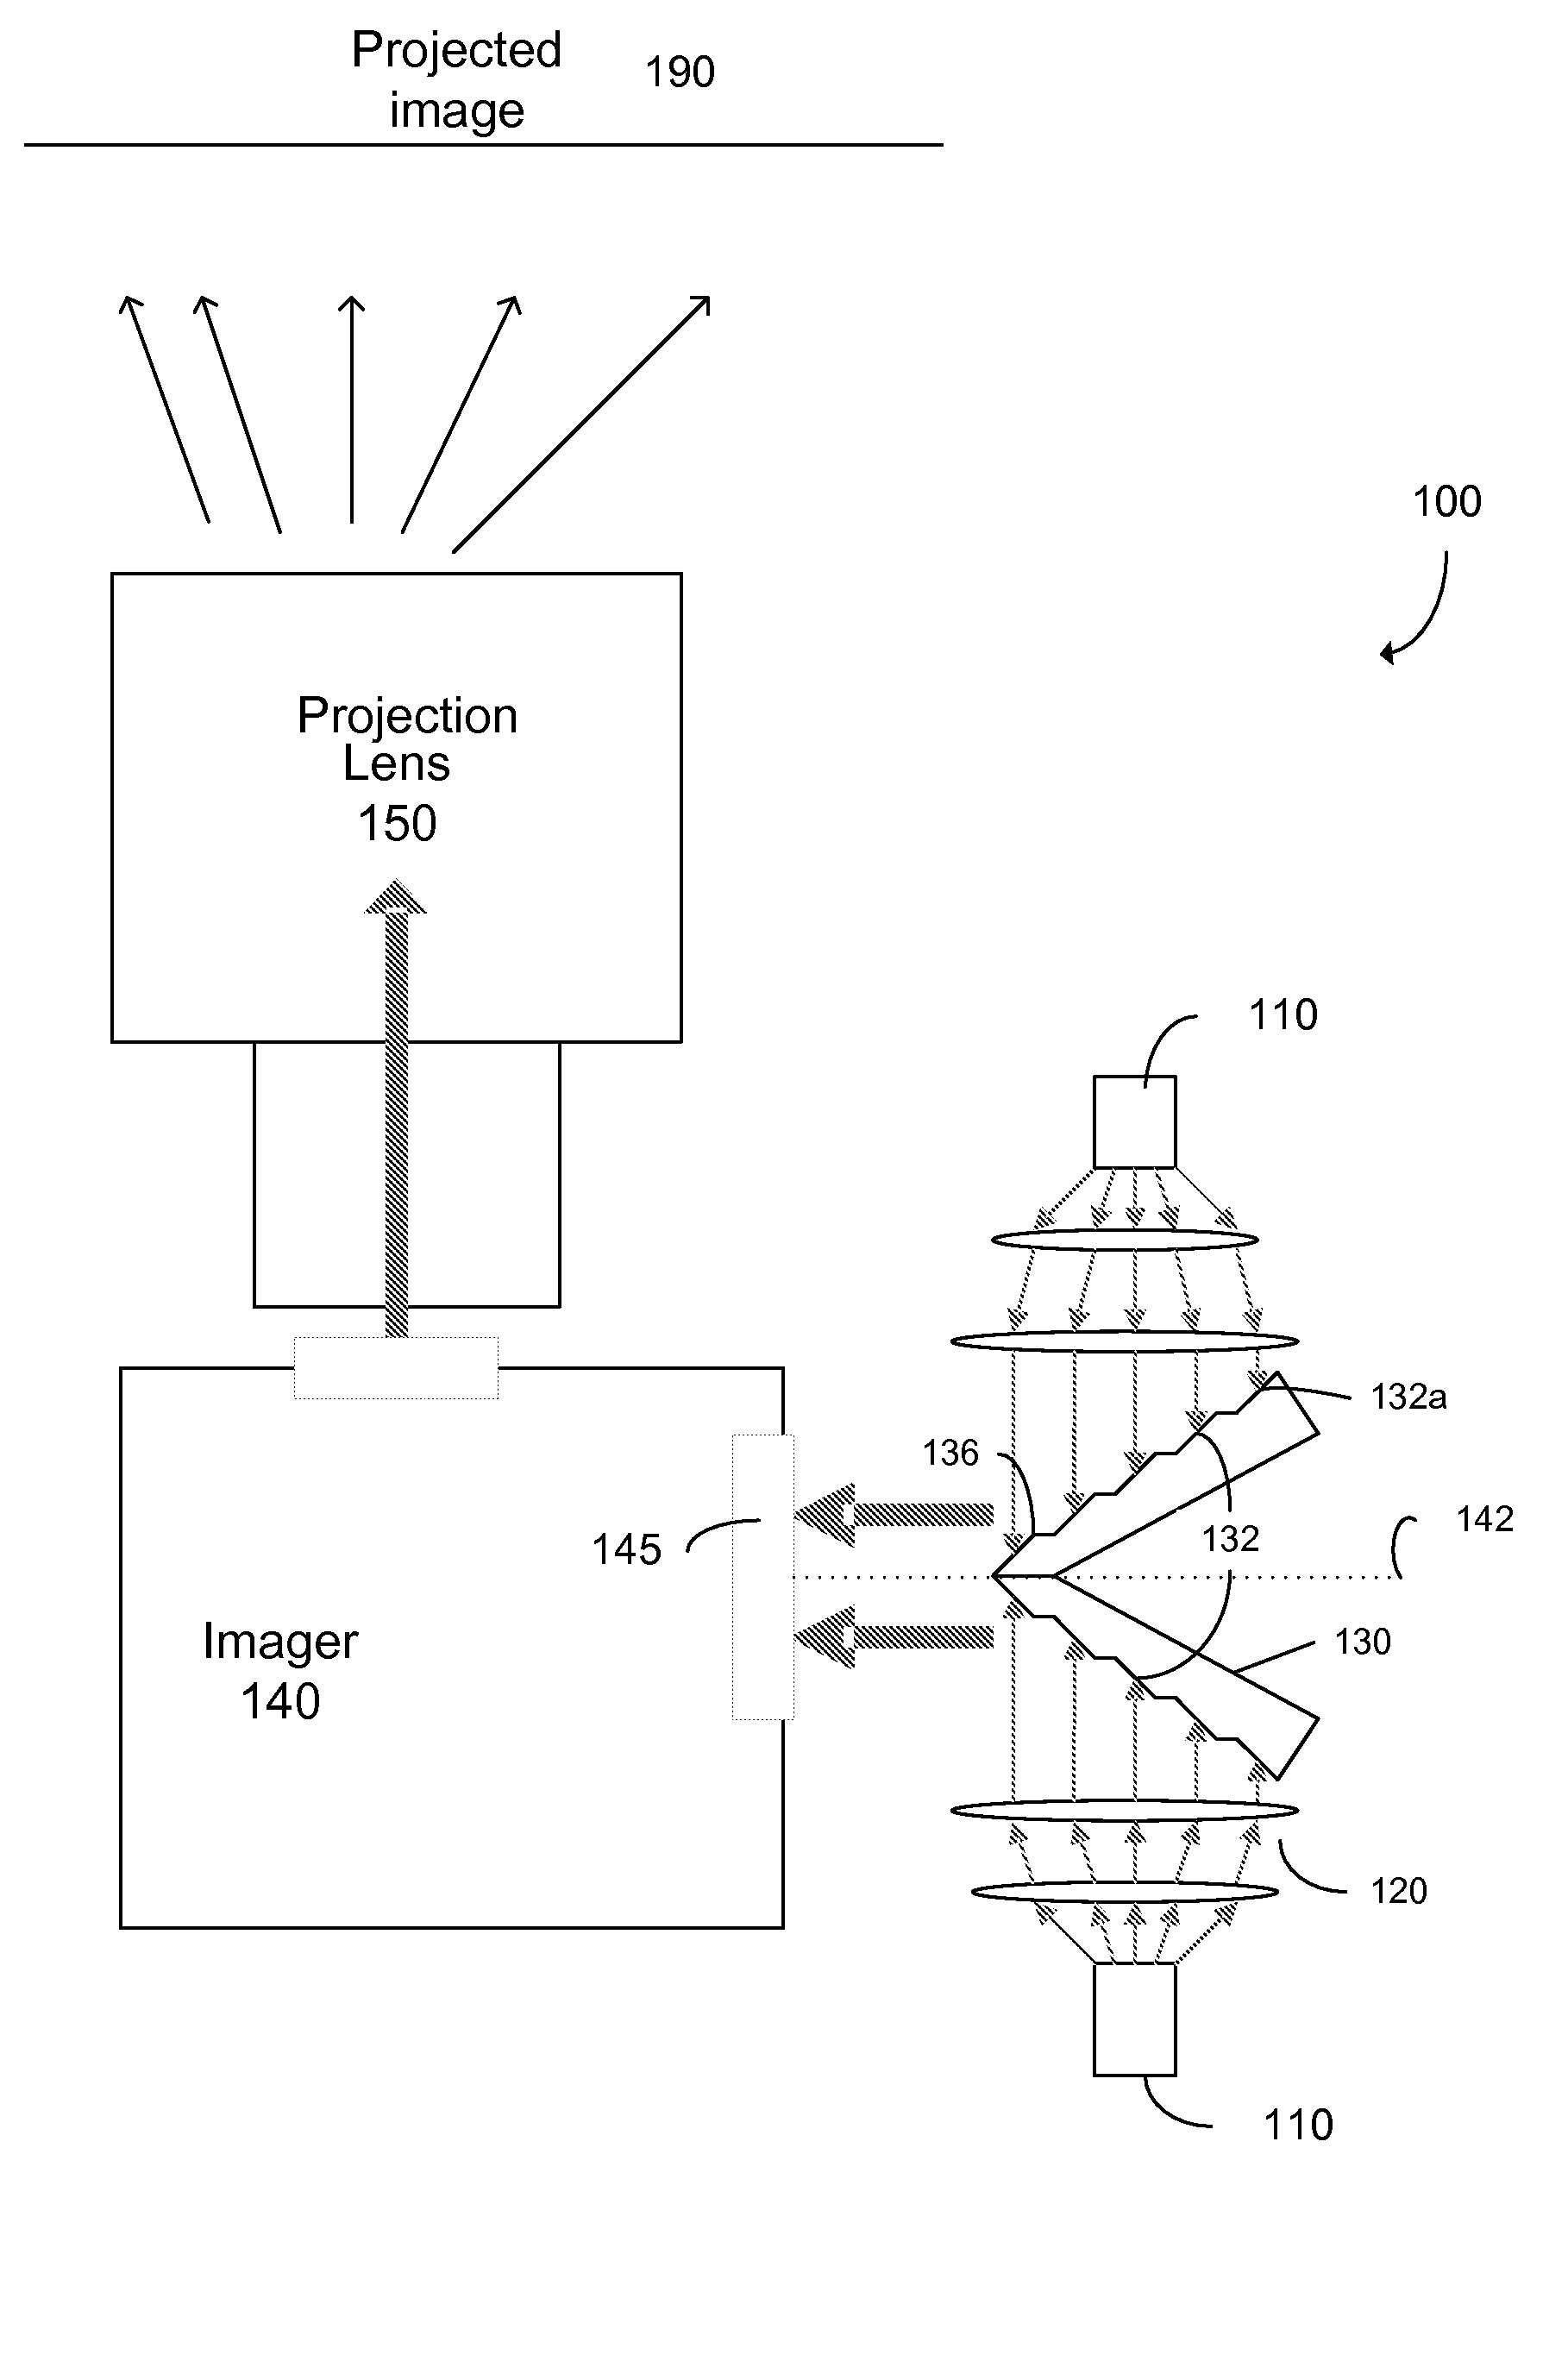 High intensity image projector using sectional mirror